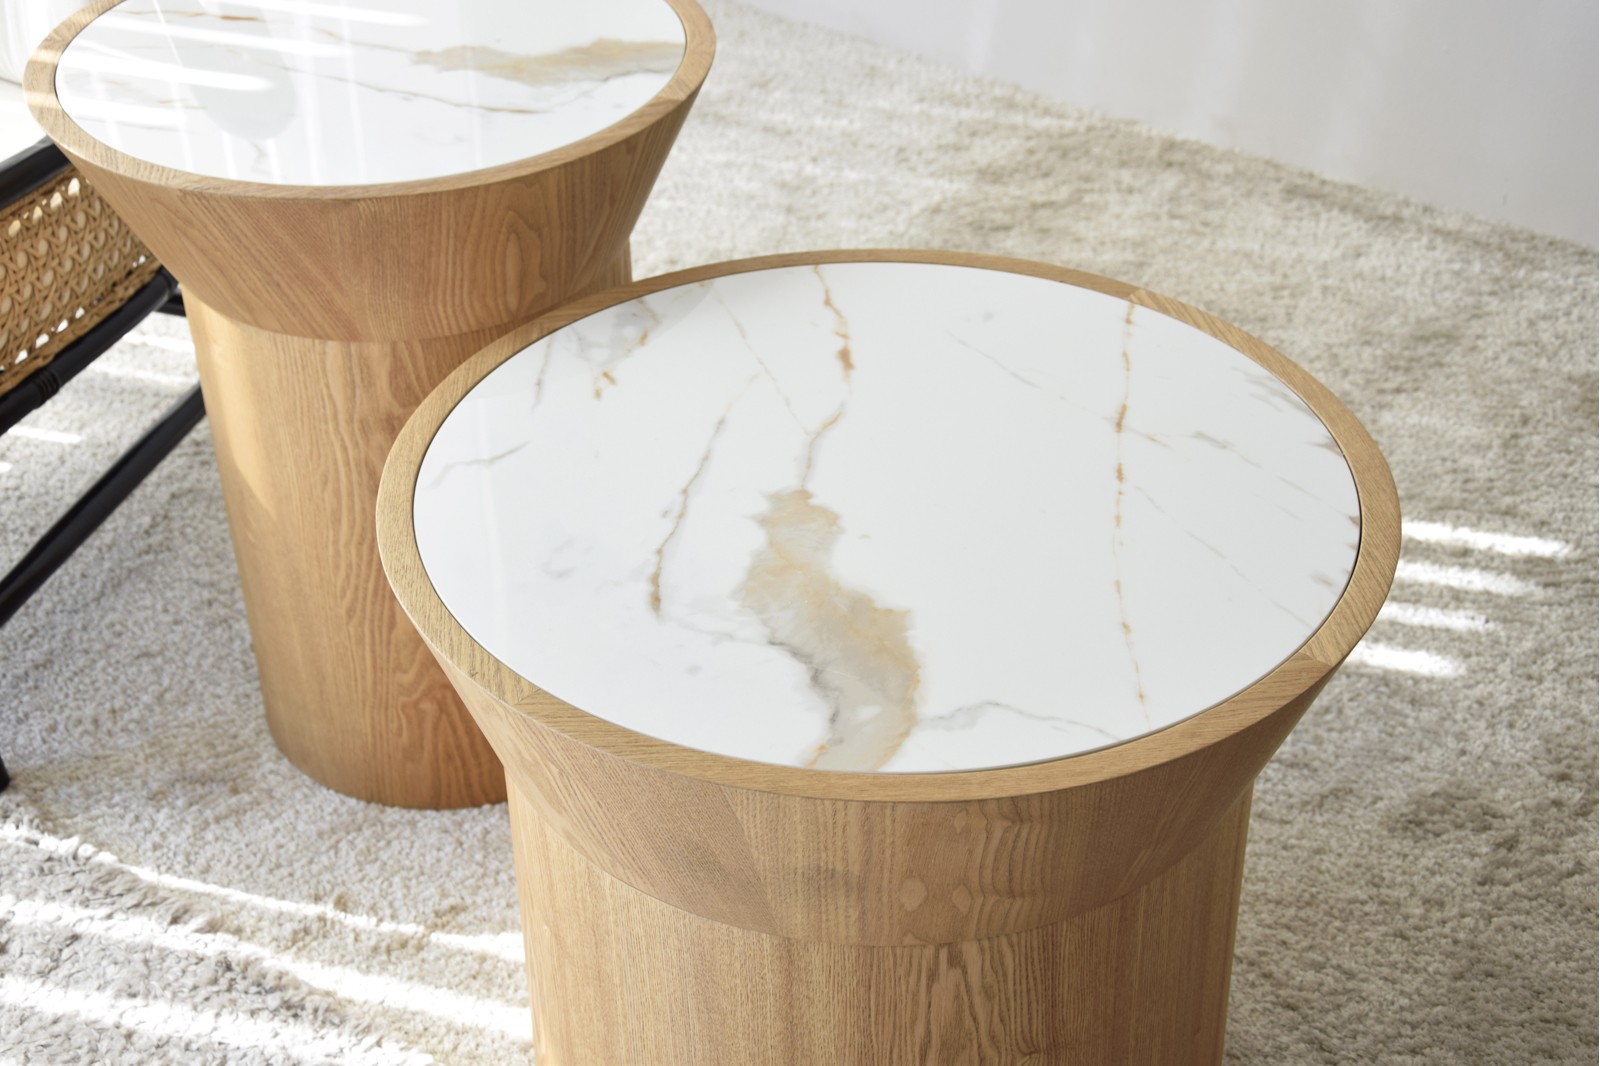 NEDA COLLECTION: SIDE TABLES, NATURAL ASH. CERAMIC